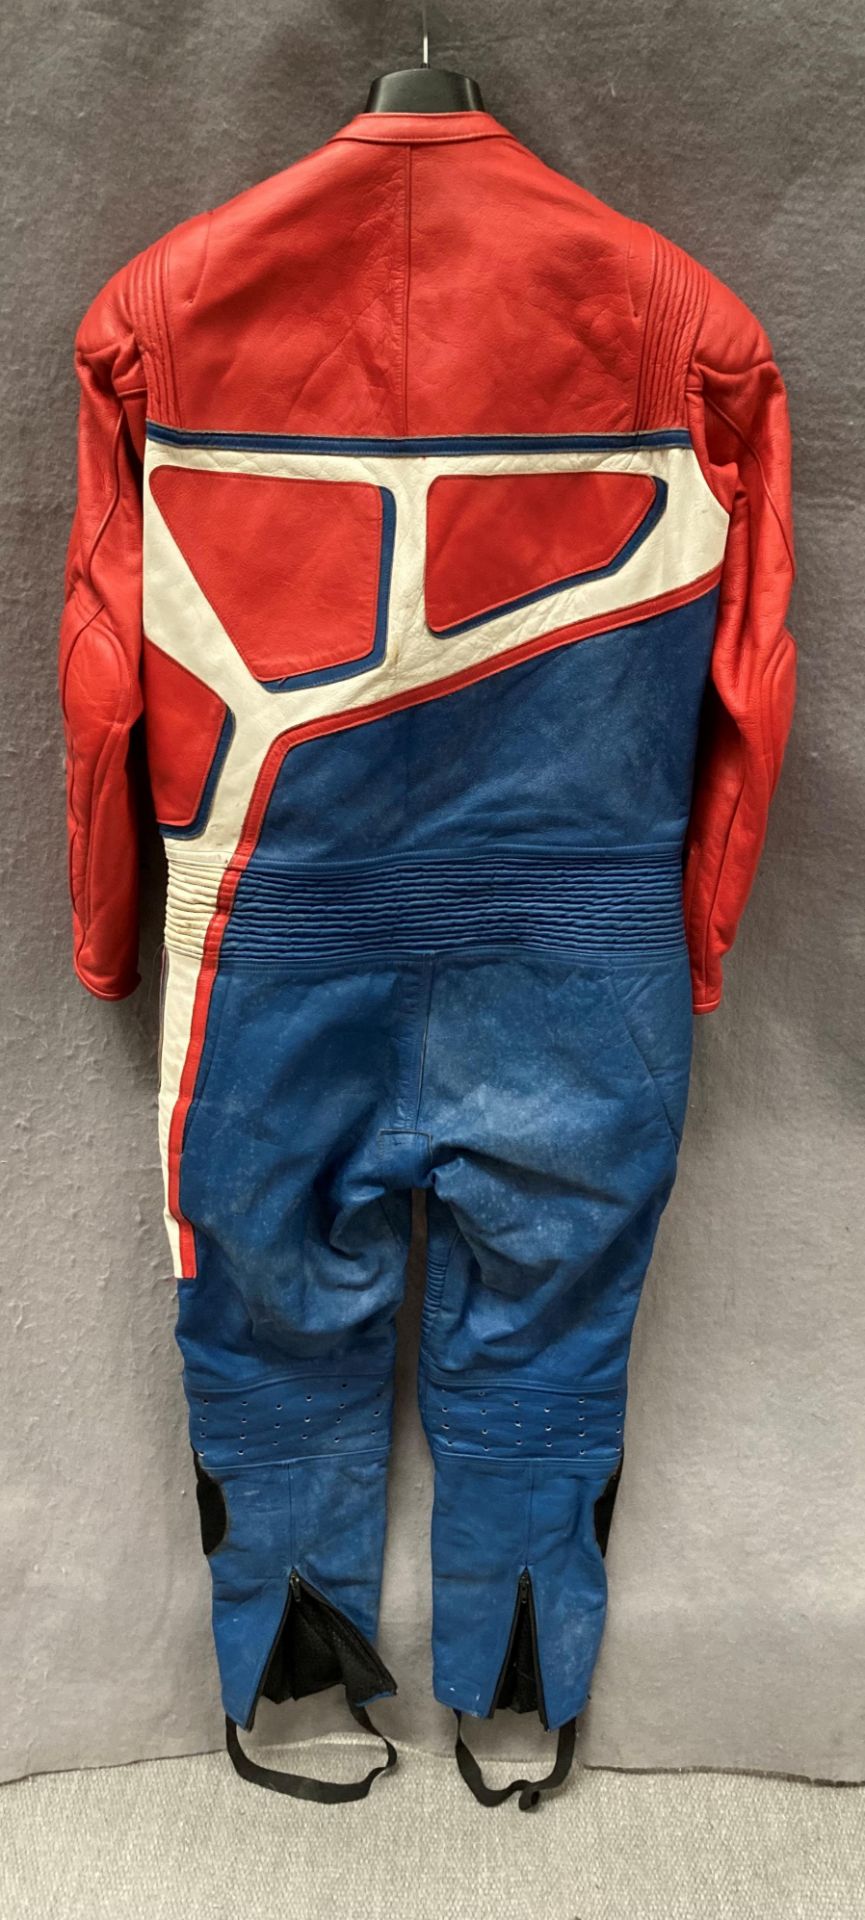 Vintage TT leathers motorbike suit/leathers in red, - Image 3 of 3